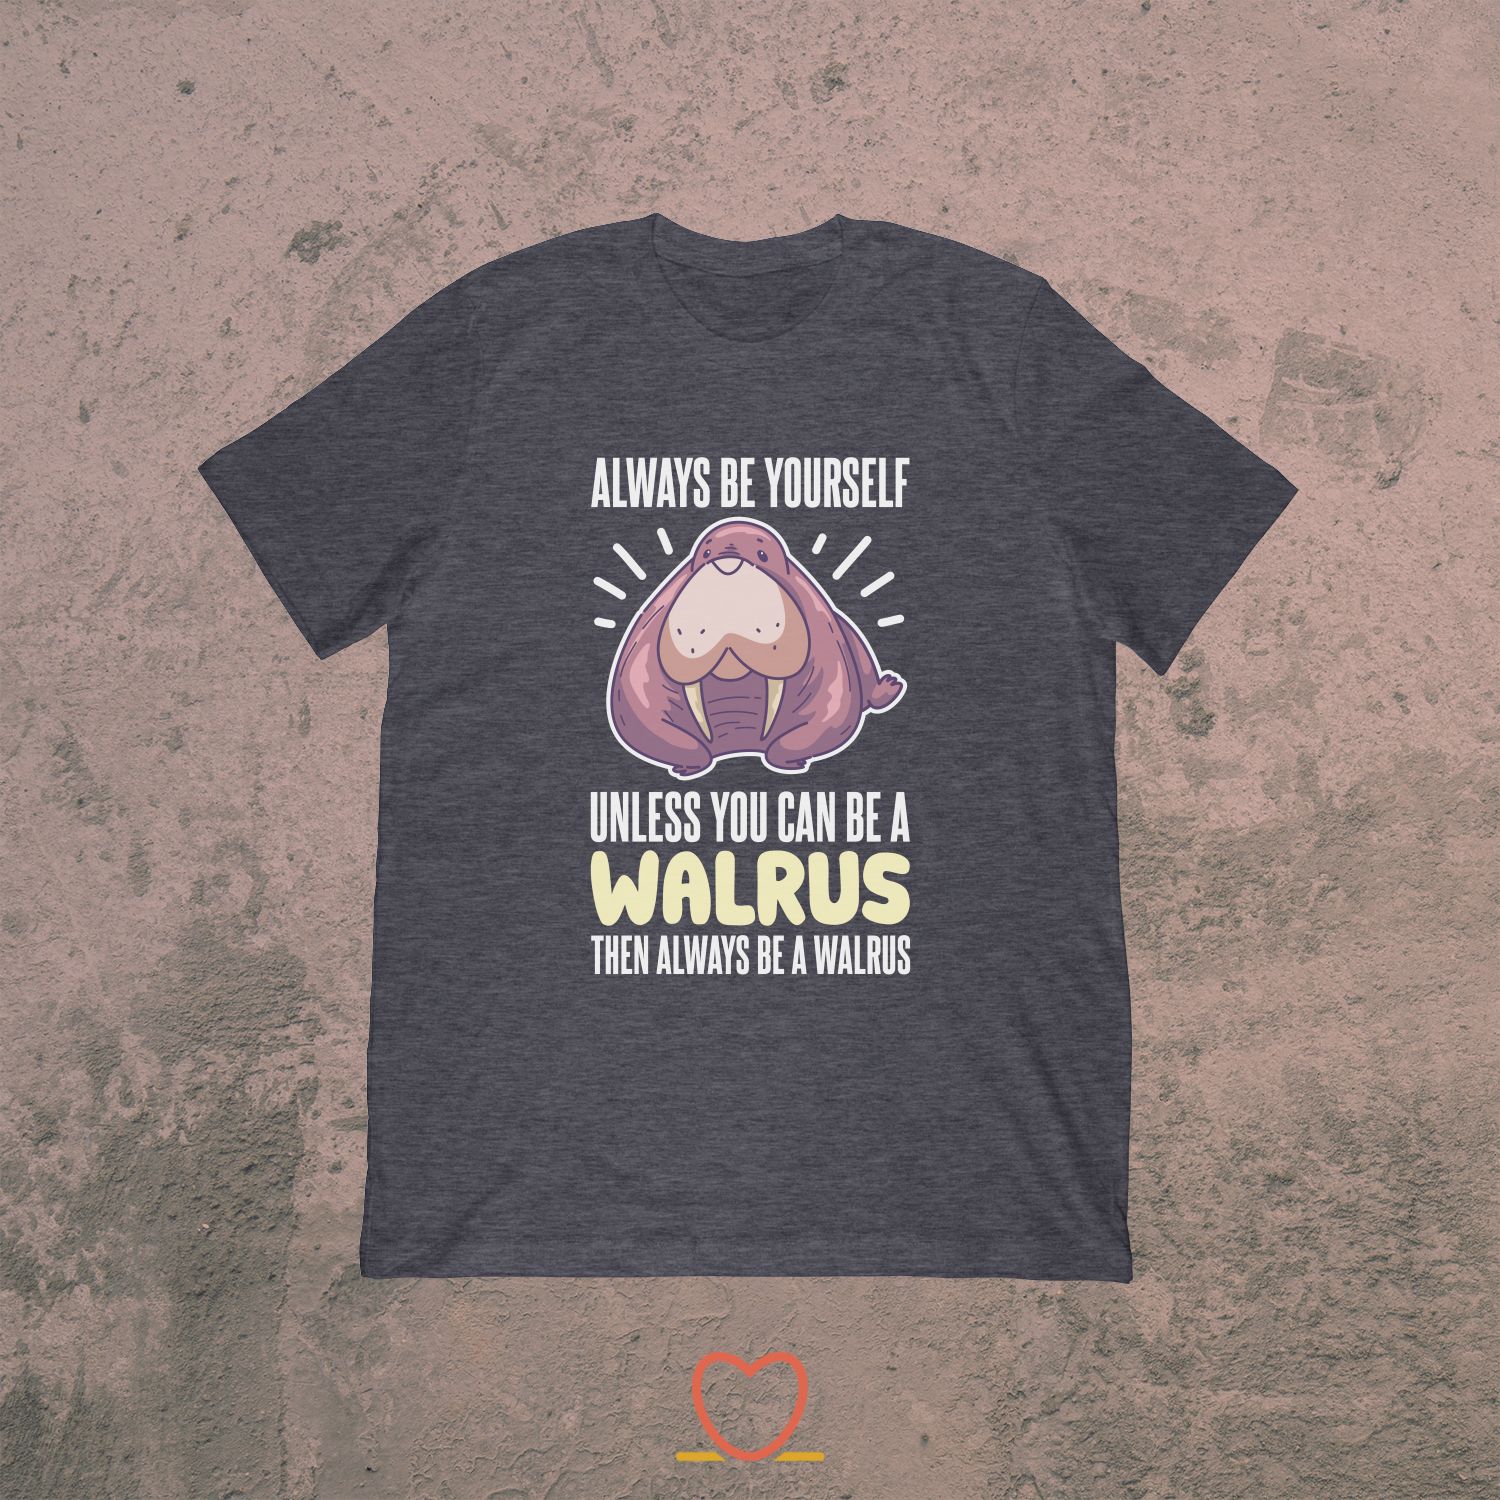 Always Be Yourself Be A Walrus – Funny sealife Tee